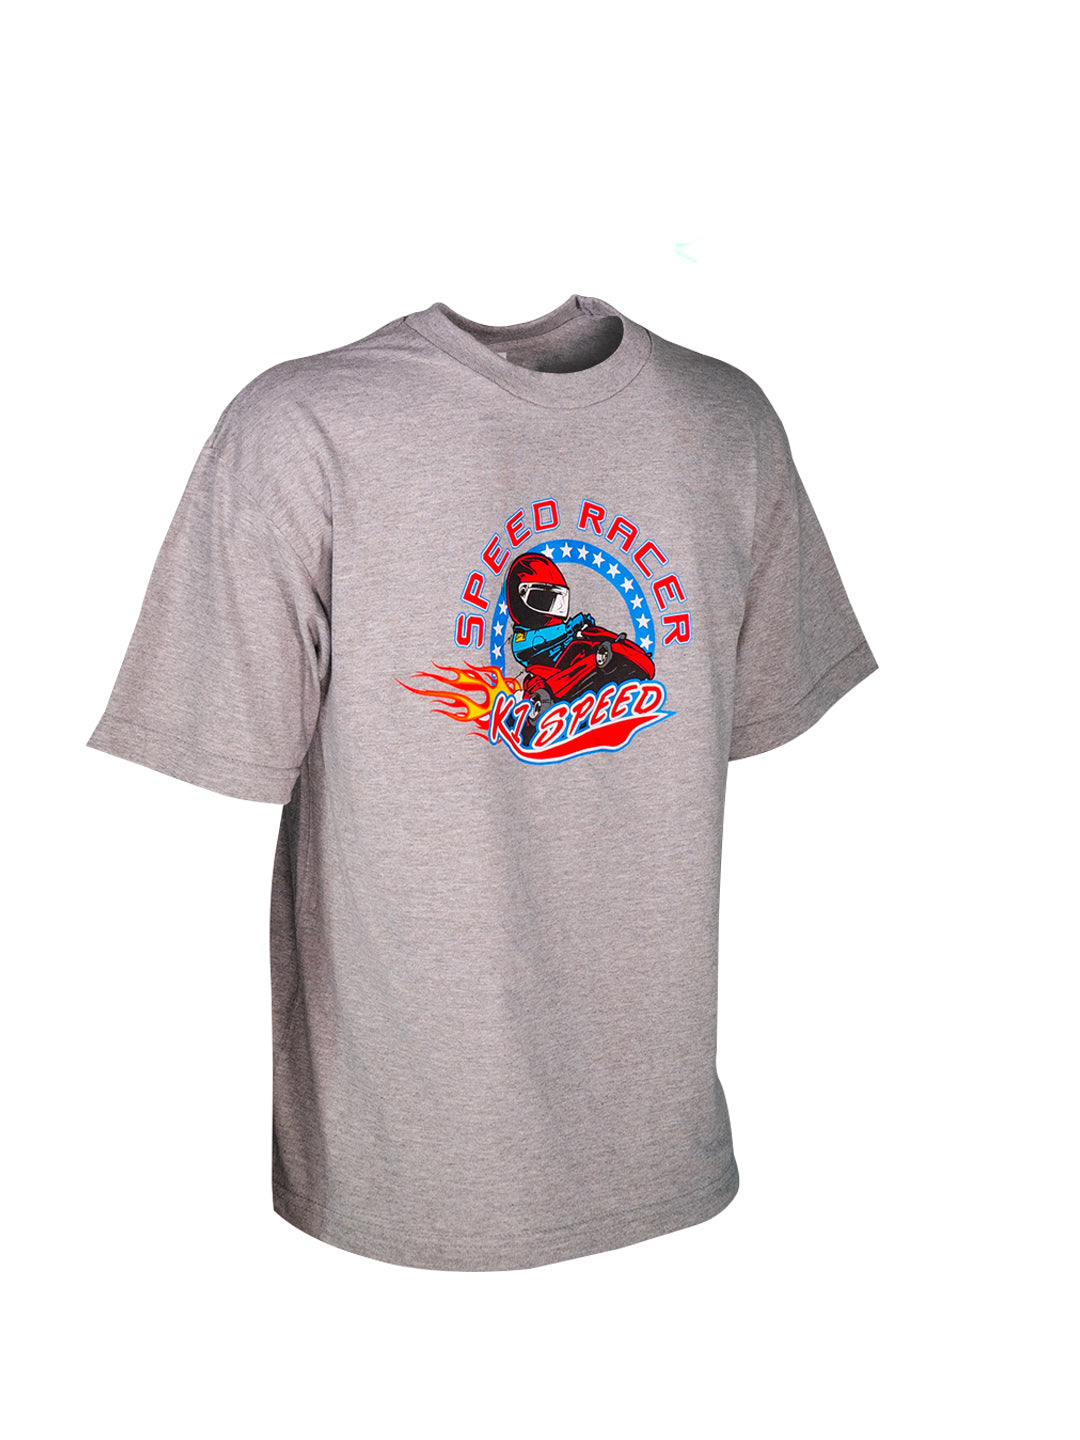 Speed Racer Youth Tee